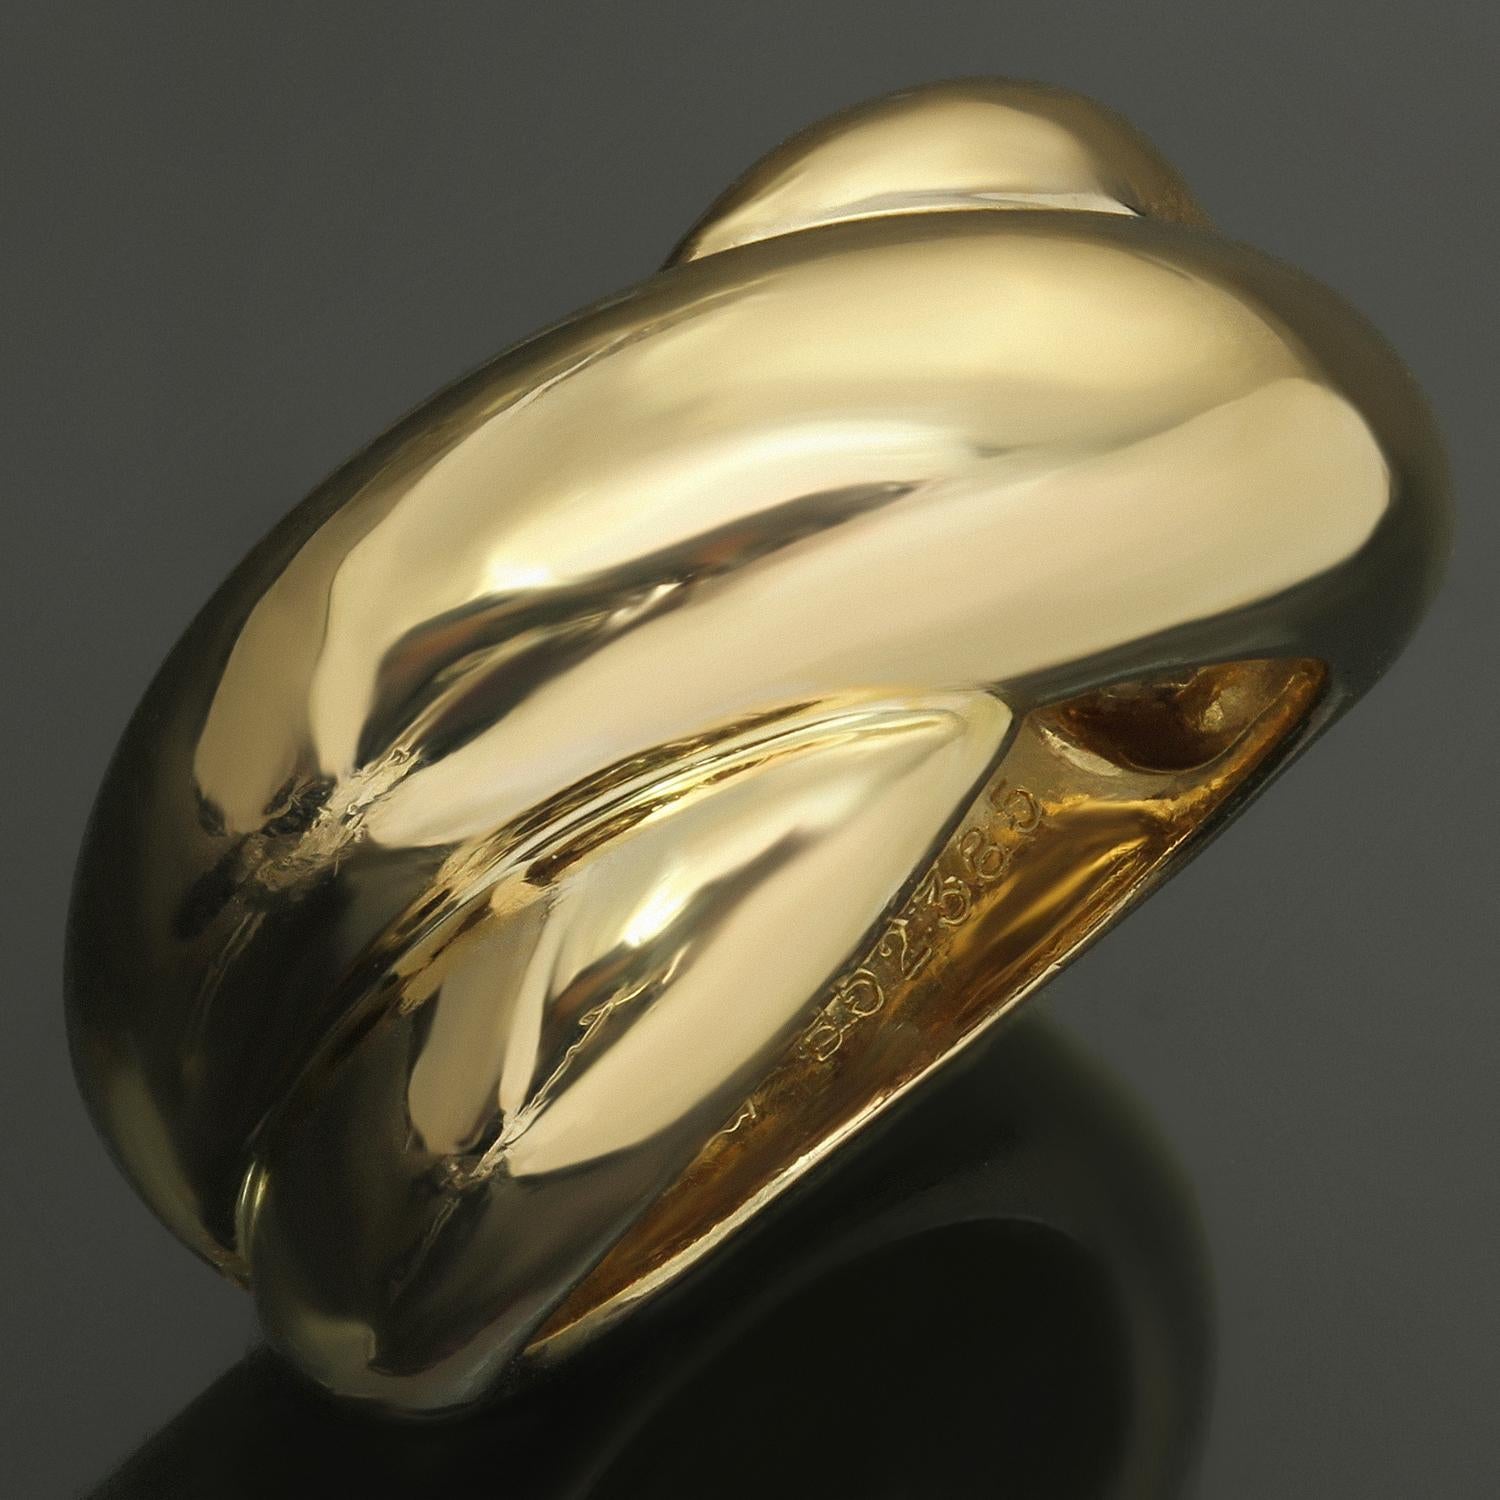 This iconic Cartier ring features the classic crossover design crafted in 18k yellow go.d Made in France circa 1992. The ring size is 5.25 - EU 50. Non-resizable. 